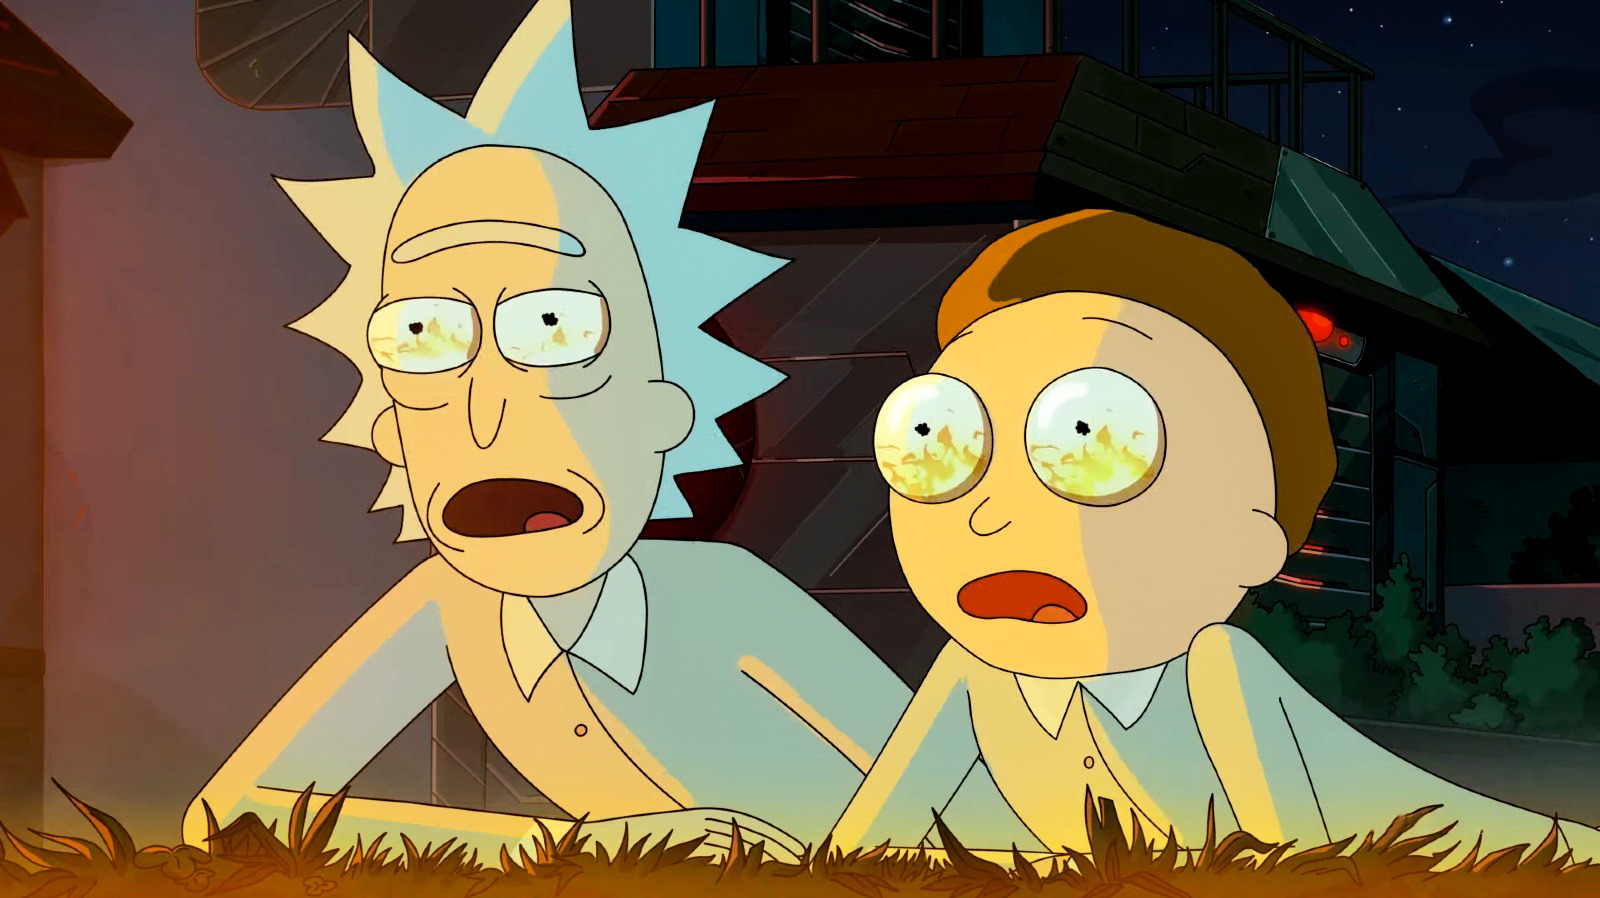 Rick And Morty Season 6 Trailer: The Smiths Do Die Hard.